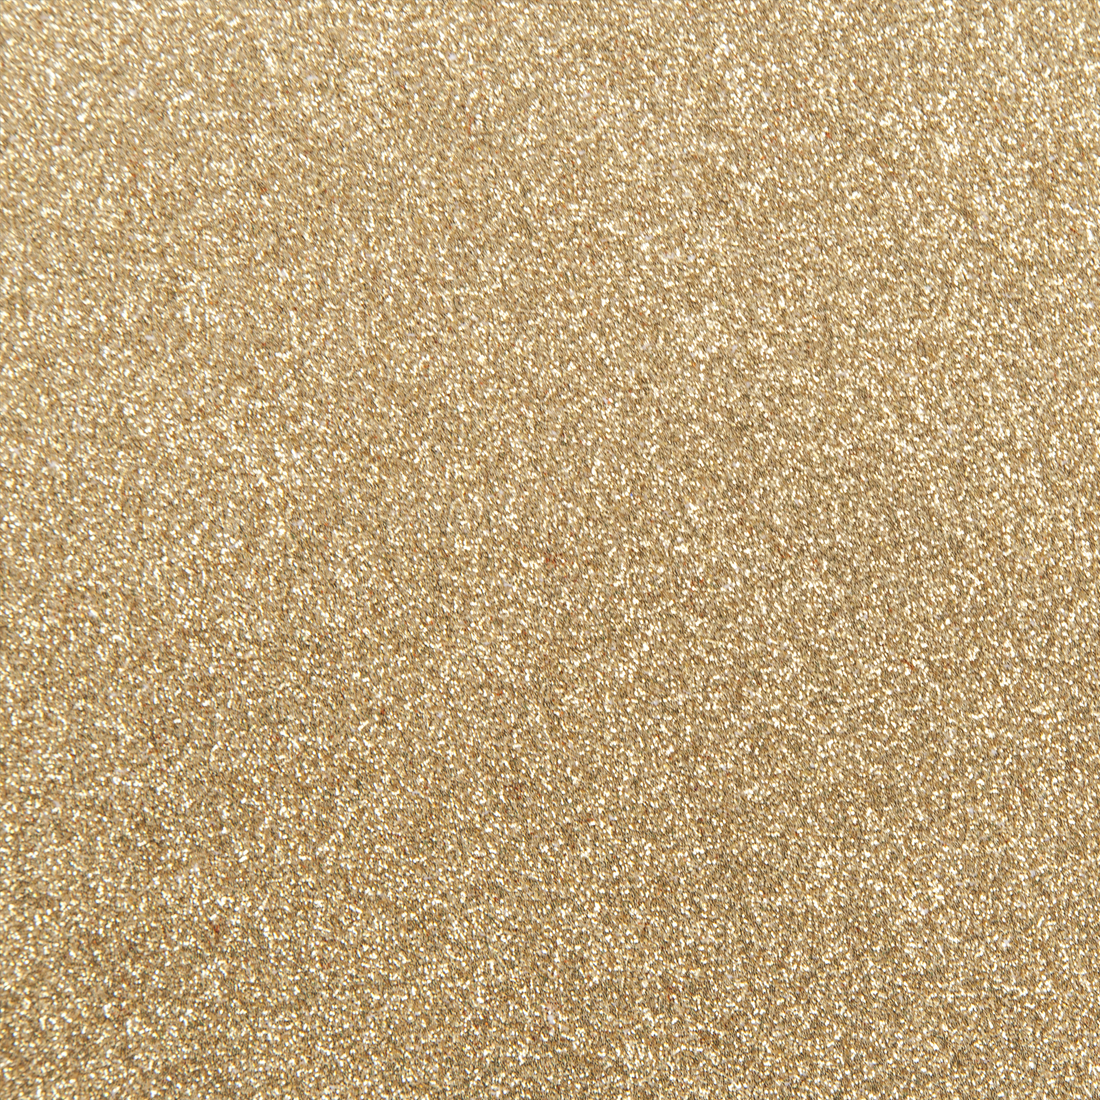 YINUOYOUJIA Gold Glitter Cardstock Paper 12 Sheets 12 x 12 Heavyweight Glitter Cardstock Construction Premium Sparkly Paper for Cricut Machine